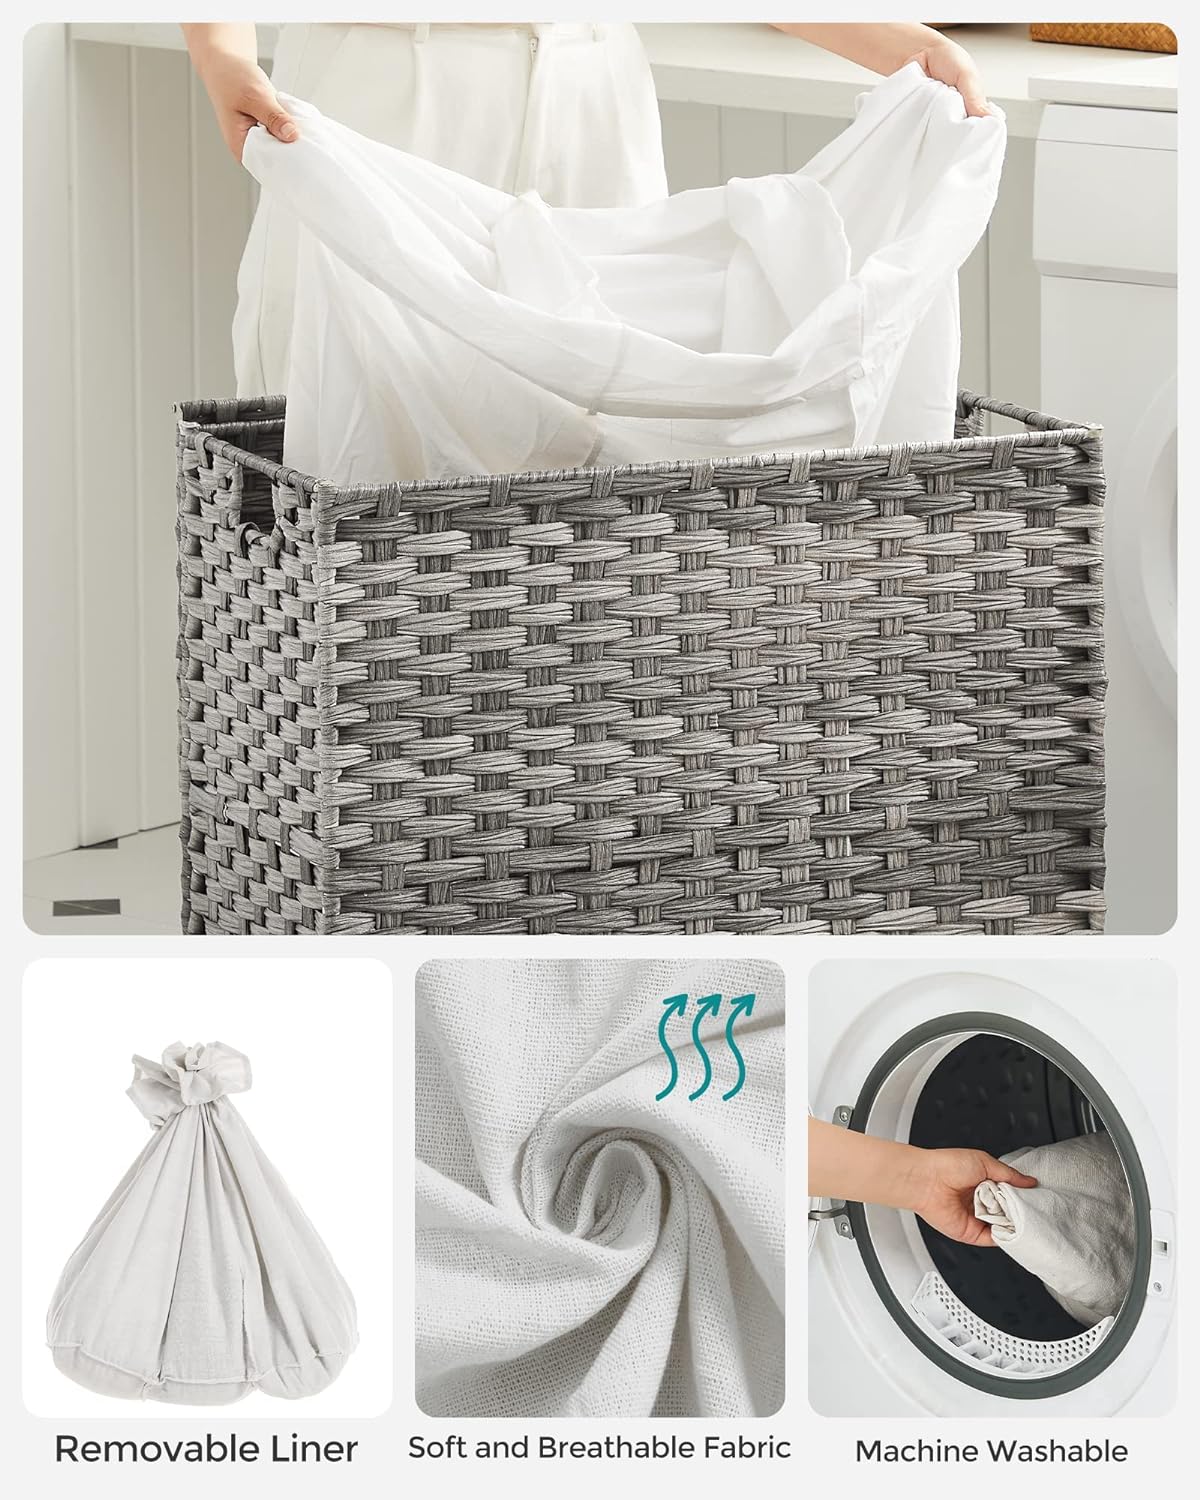 SONGMICS Laundry Hamper with Lid and Wheels 140L Grey